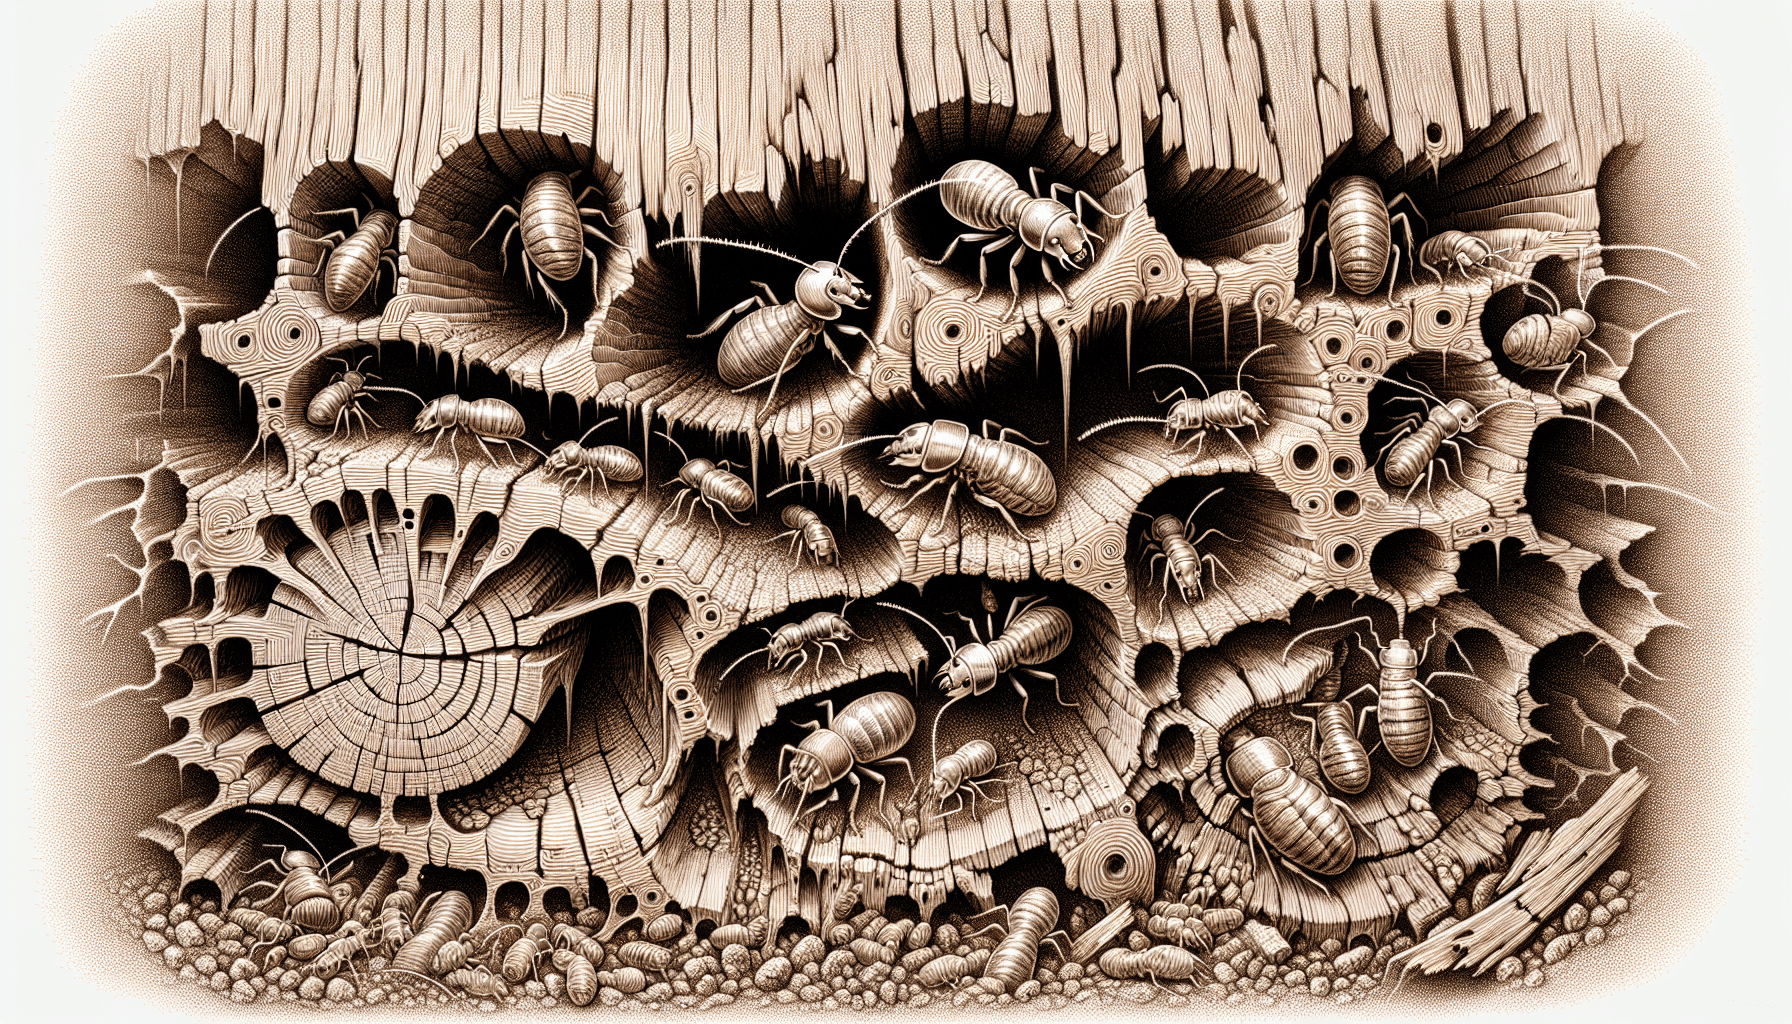 Illustration of a termite colony in wood